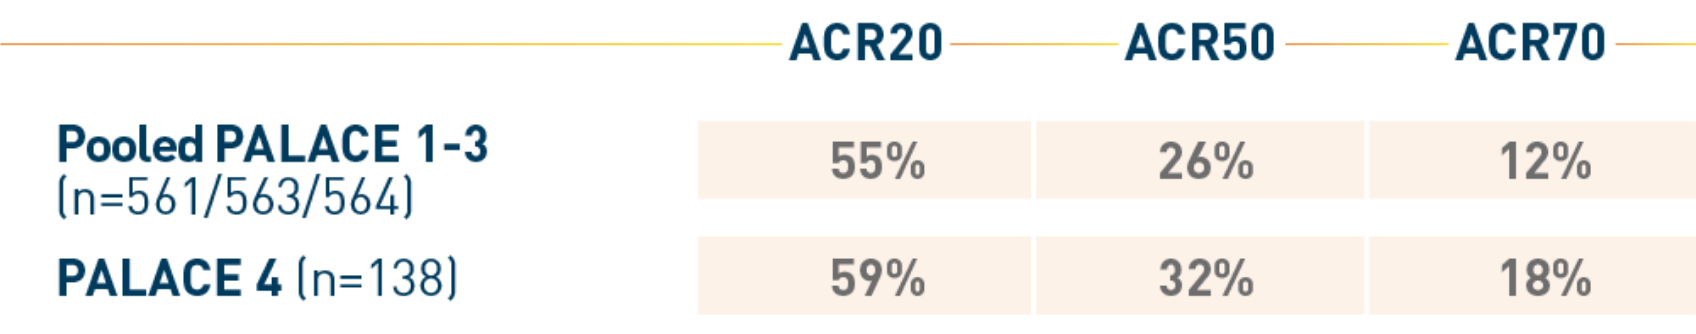 Percentages of patients on Otezla® (apremilast) with ACR50 and ACR60 responses at week 52 chart